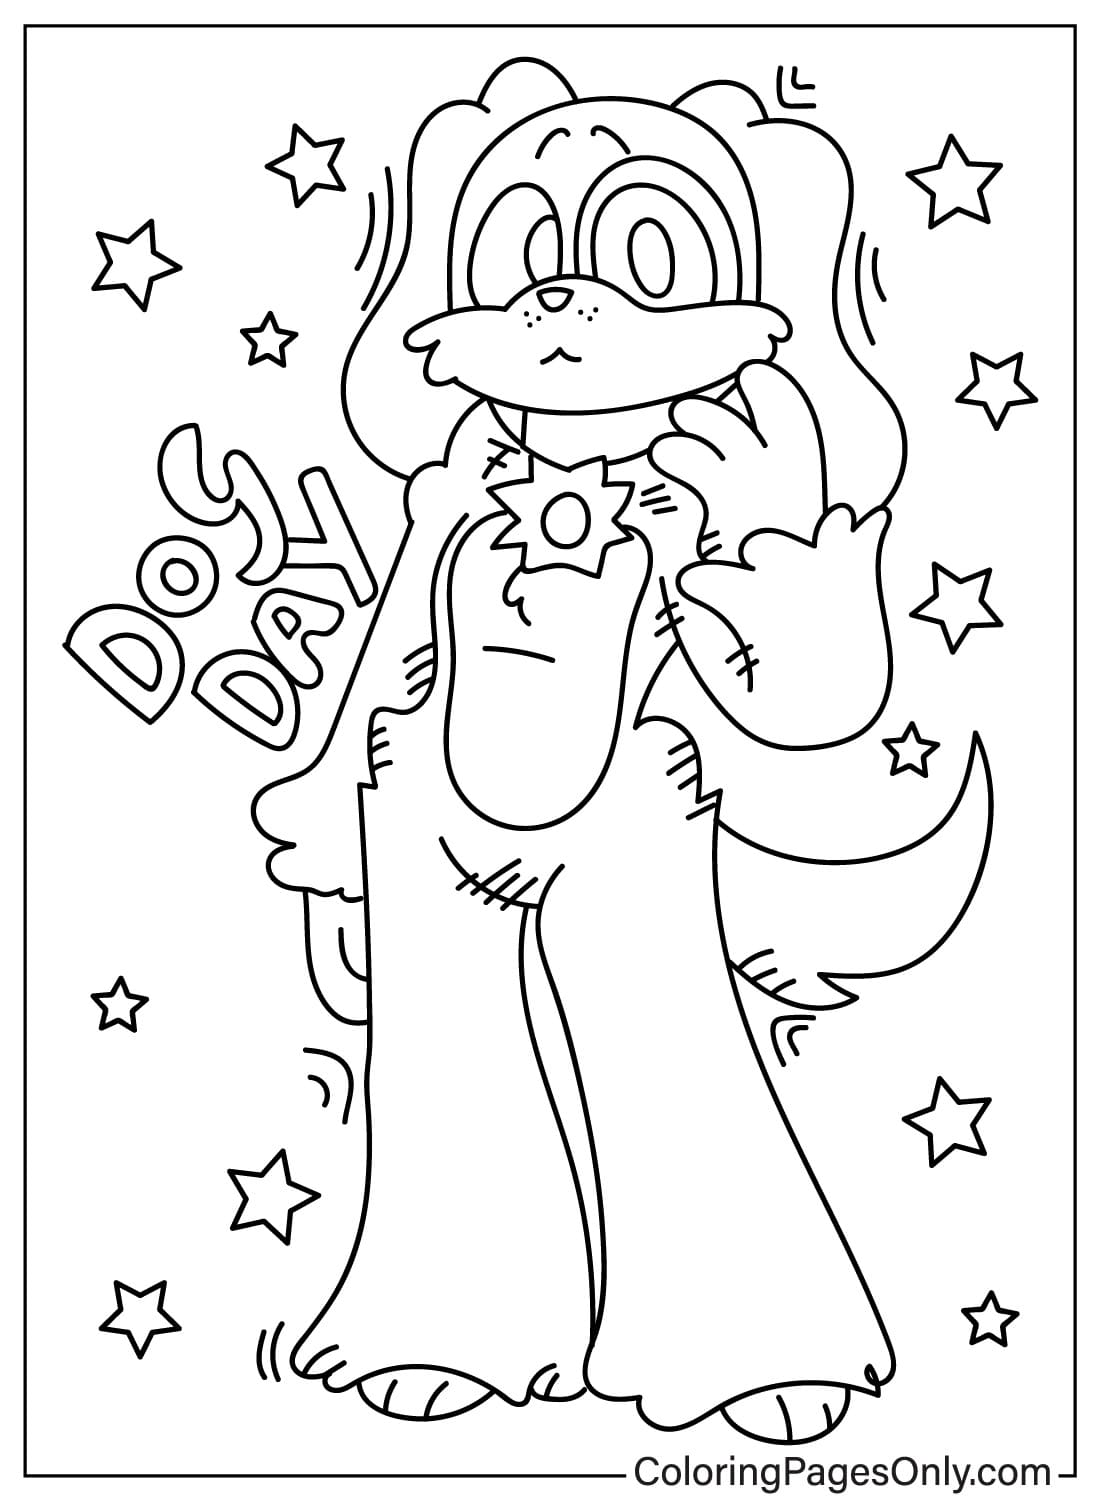 DogDay Coloring Sheet for Kids from DogDay